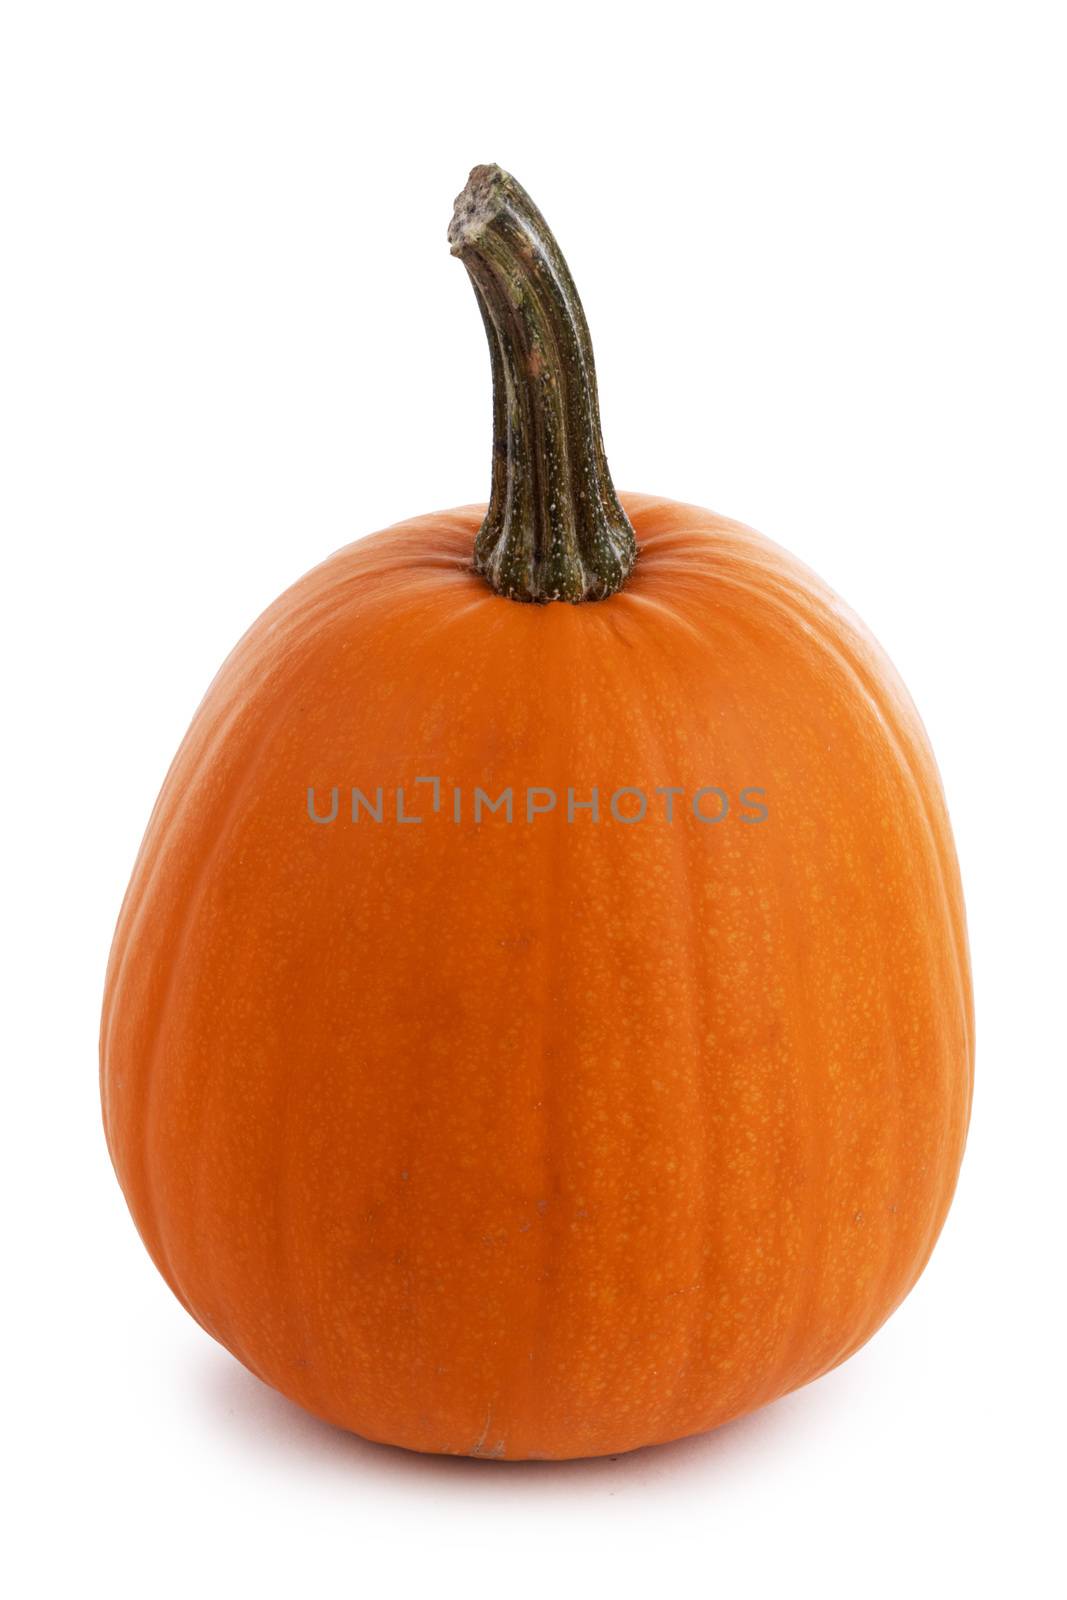 One perfect orange pumpkin closeup isolated on white background